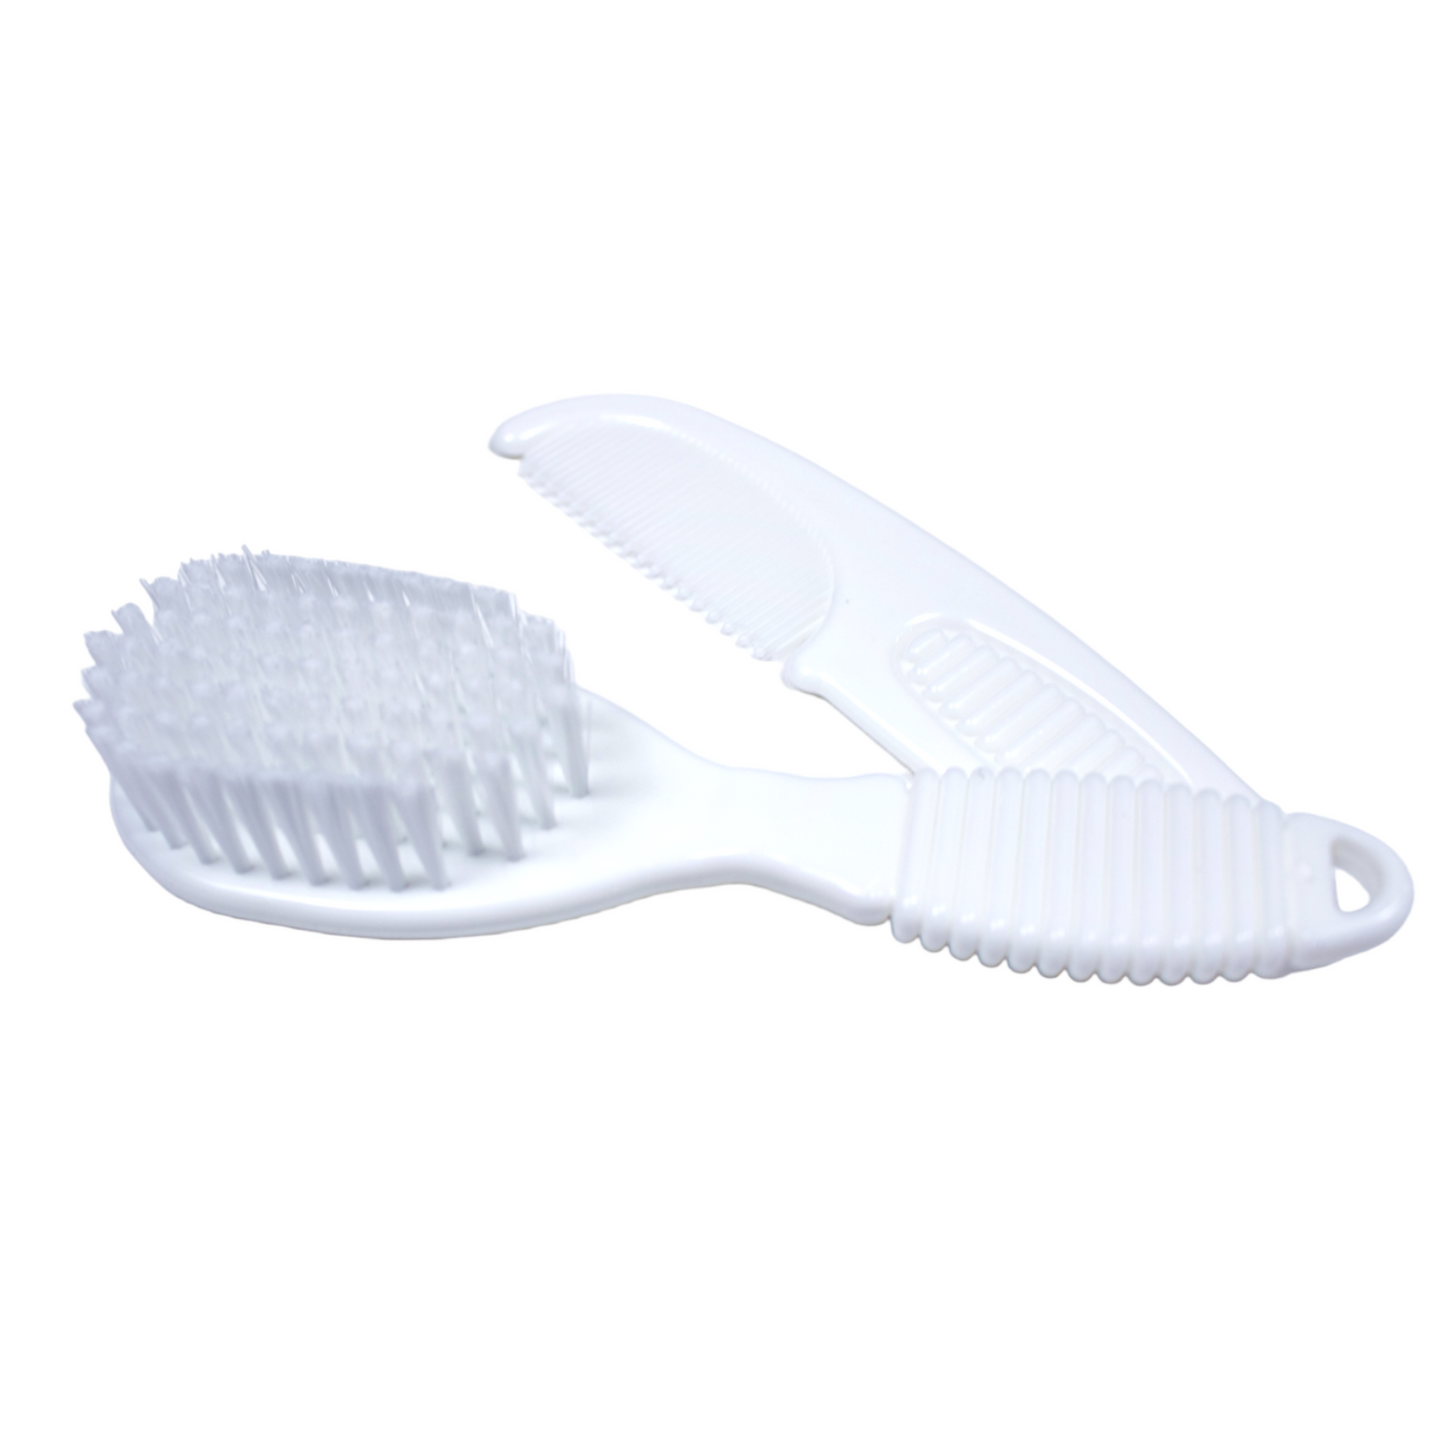 Baby brush and comb set in white. 